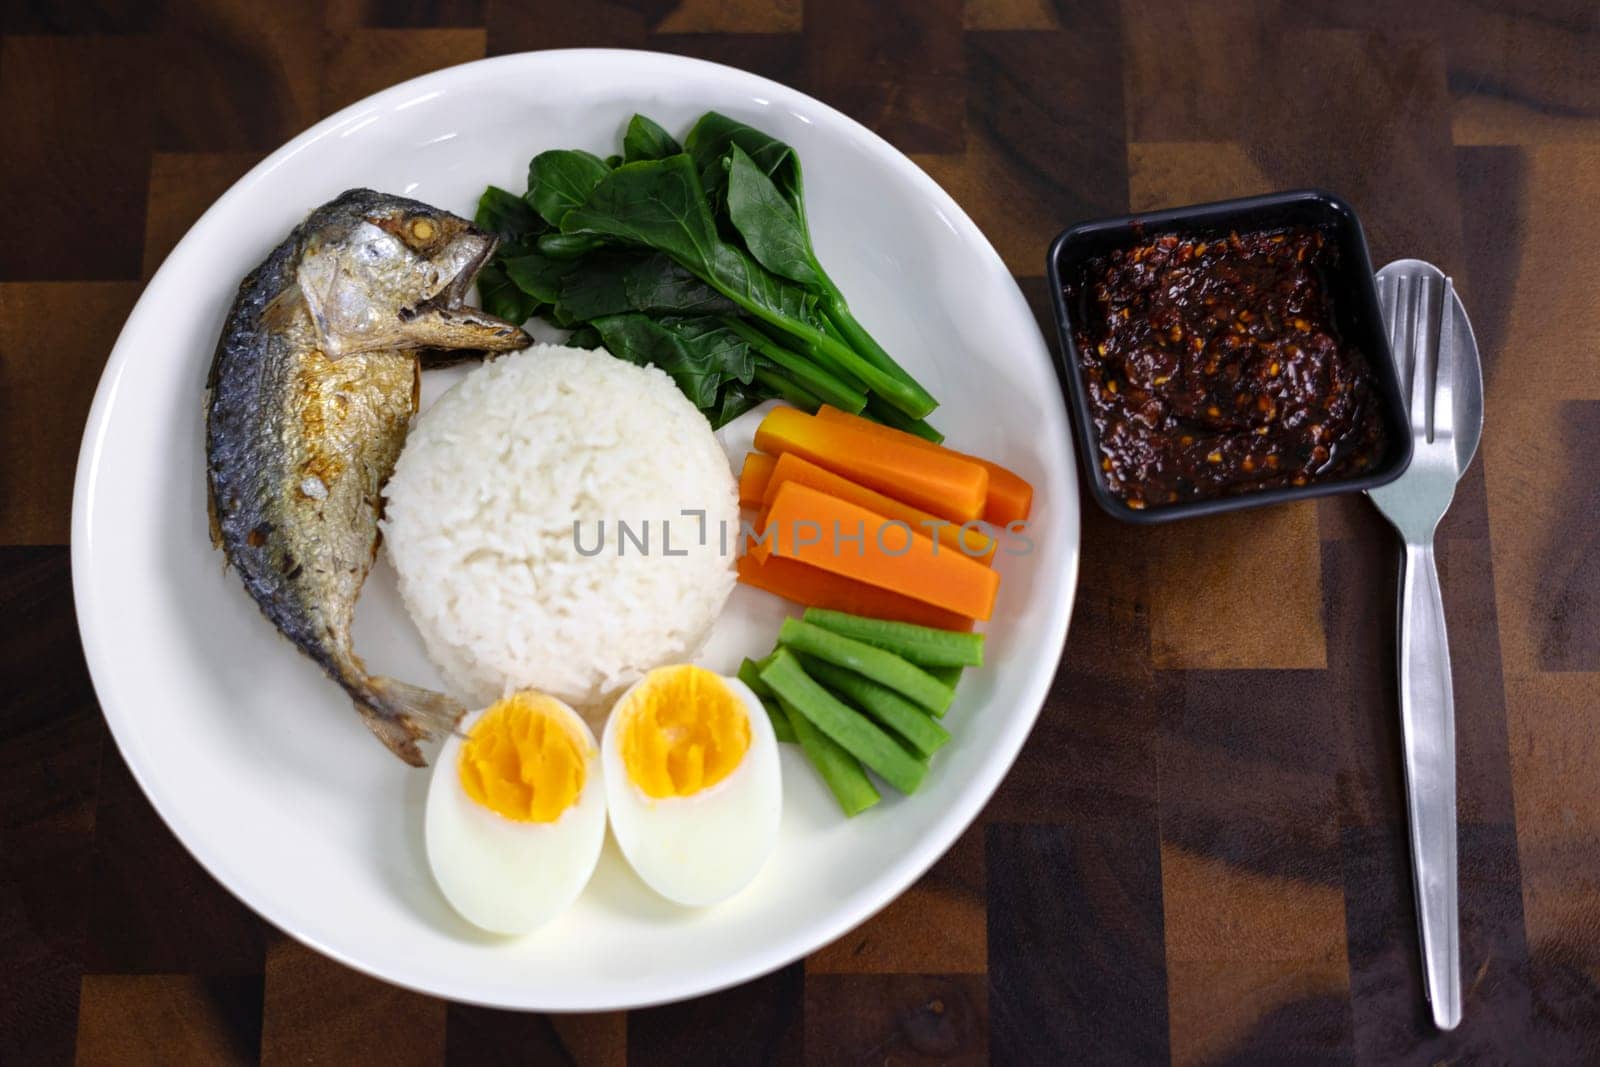 Stir Fried Mackerel With Chili Paste And Boiled Vegetables On Steamed Rice.